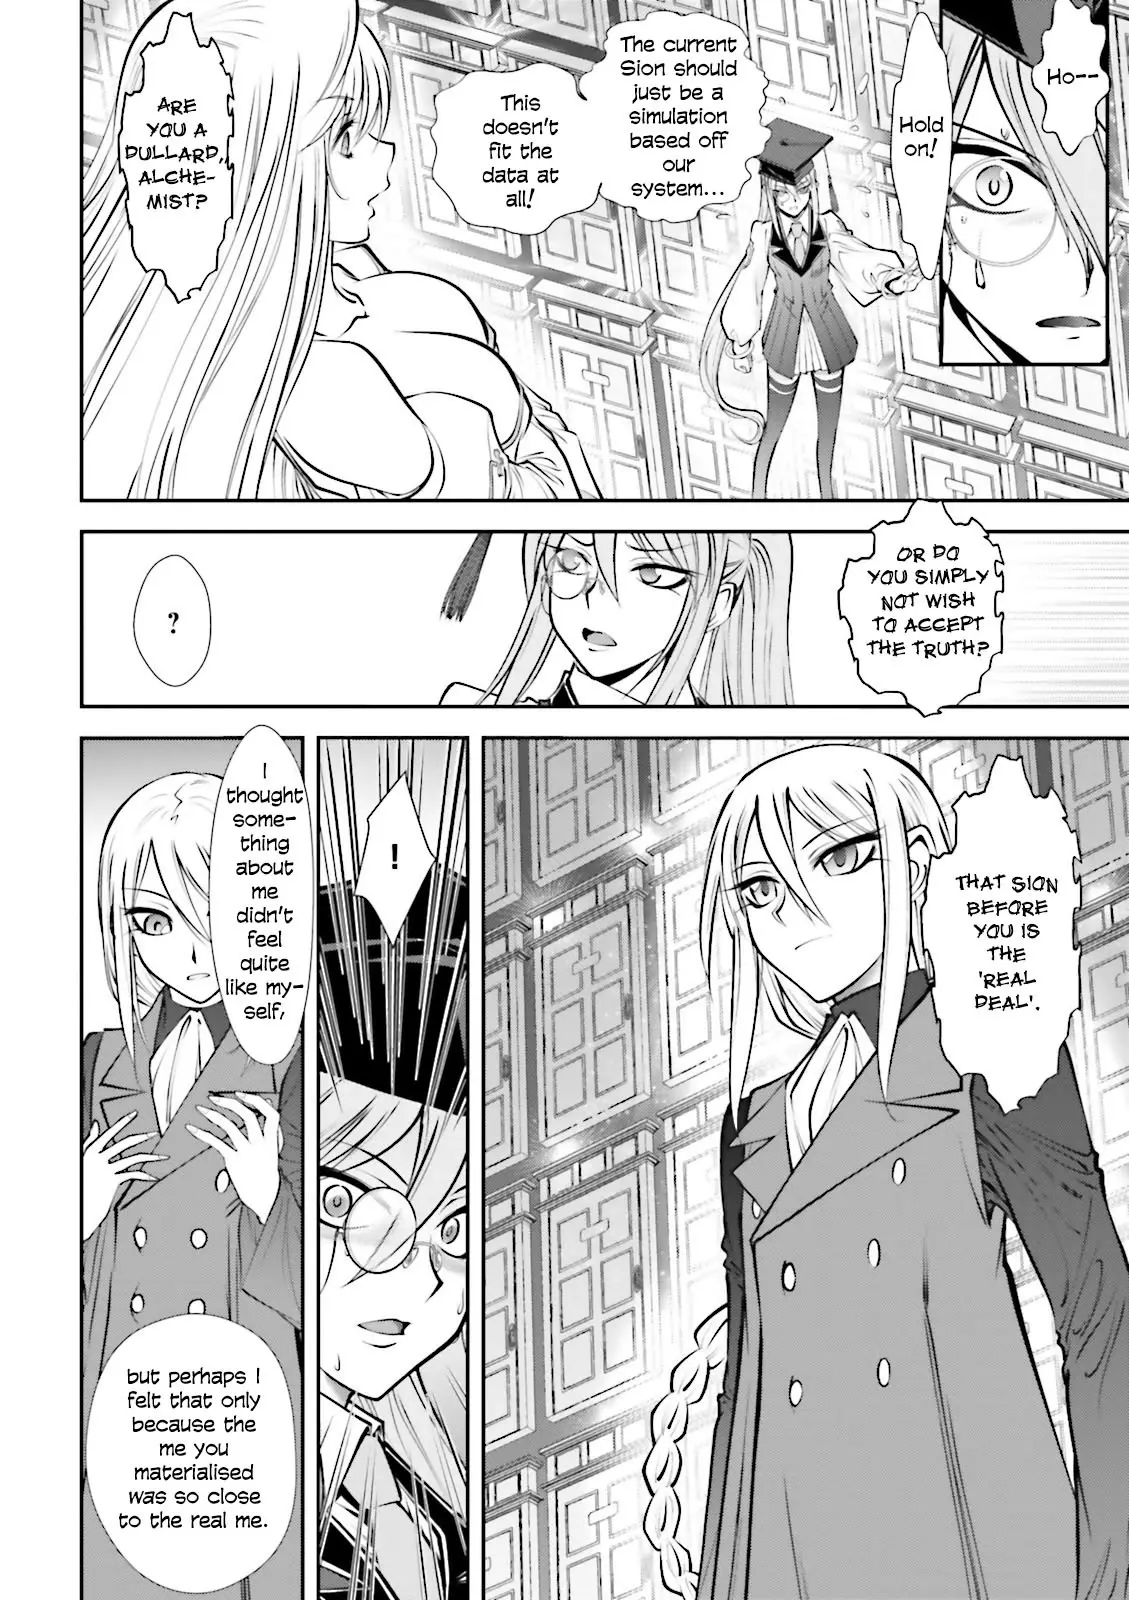 Melty Blood - Back Alley Alliance Nightmare - 9 page 41